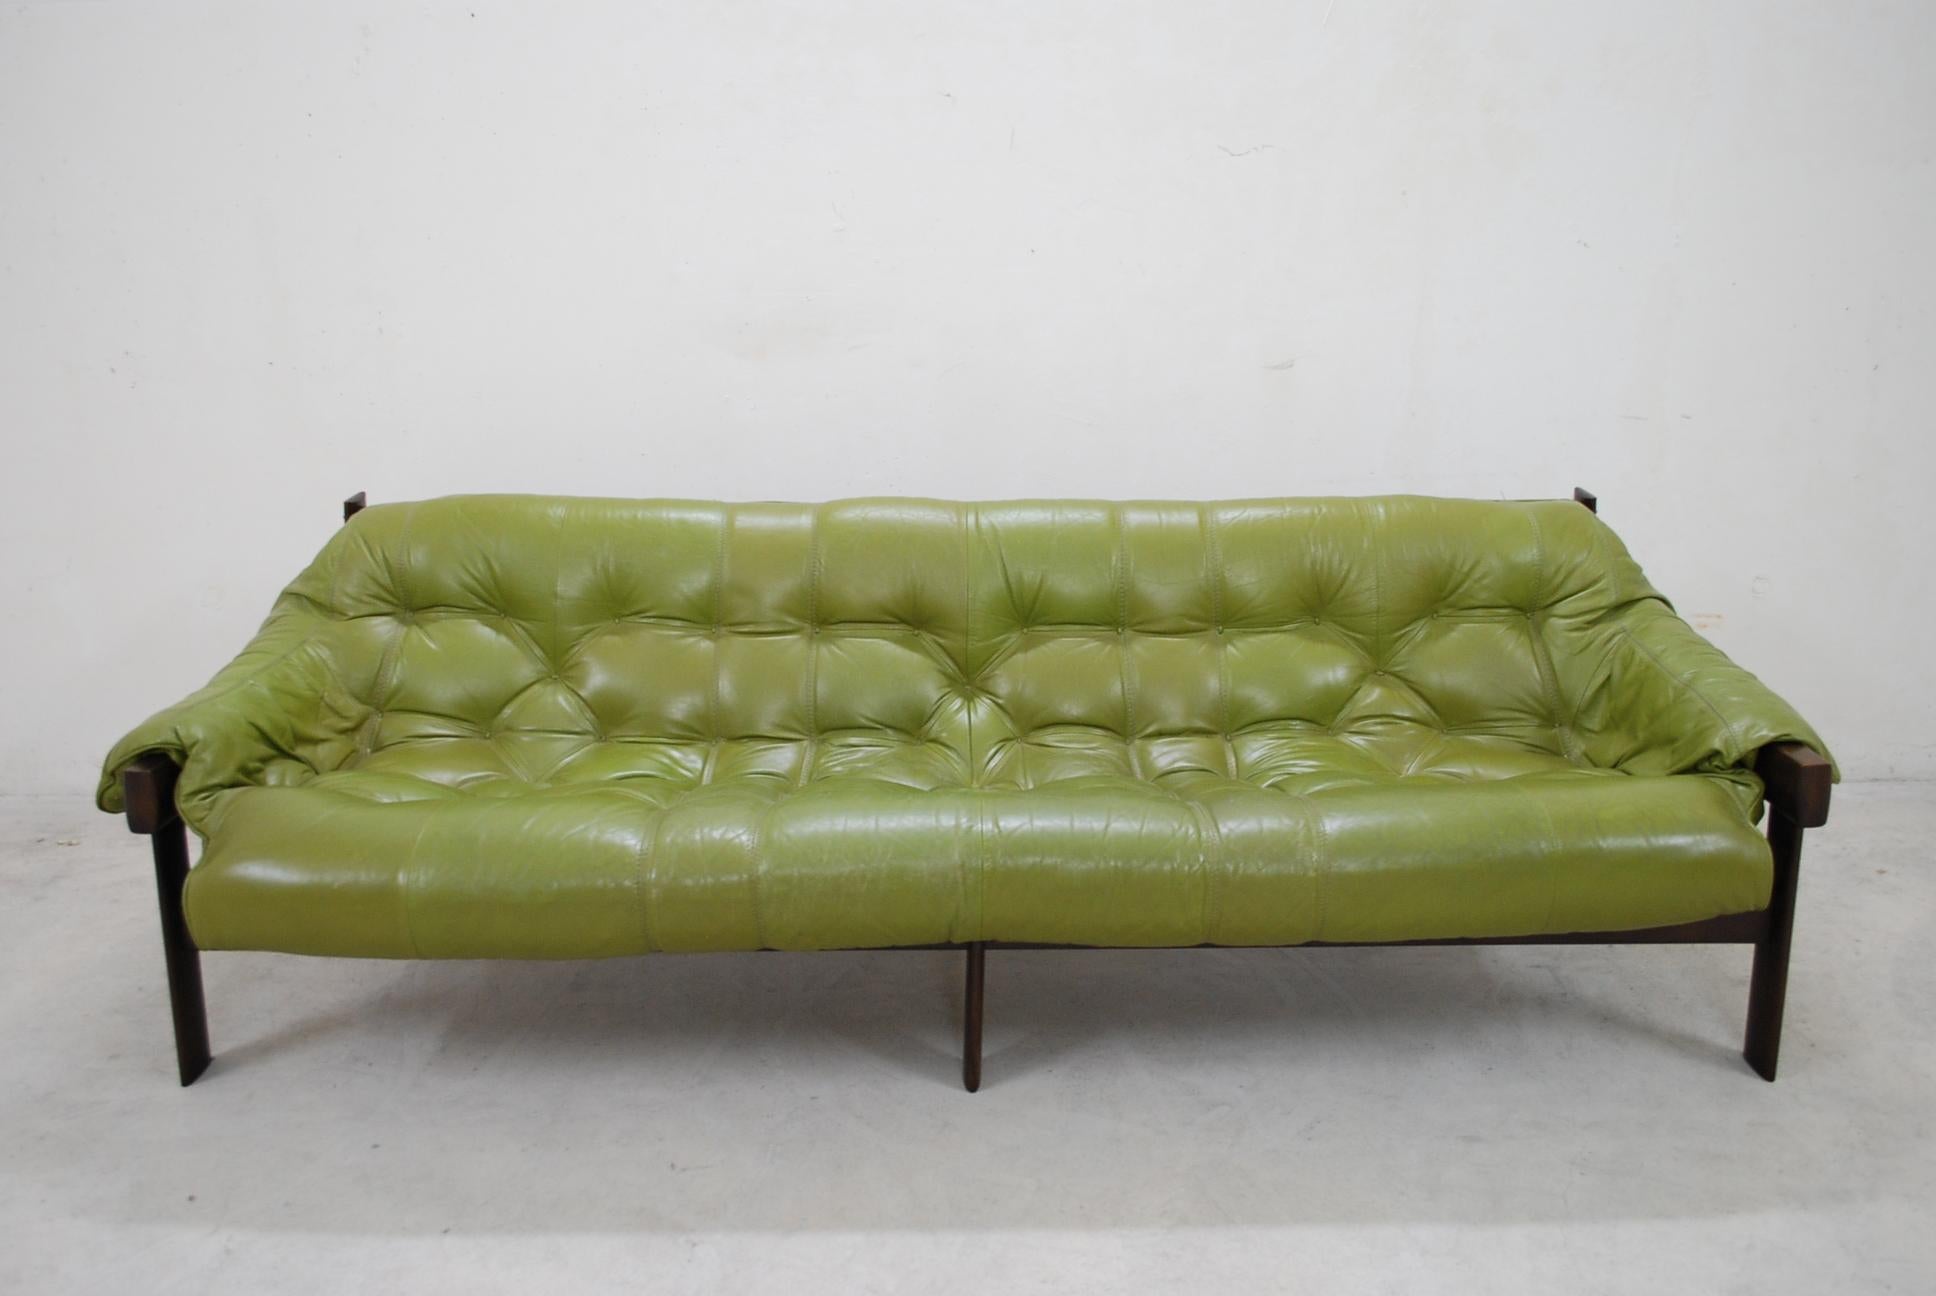 This leather sofa were designed by Percival Lafer in Brazil in 1961. Manufacture is Lafer furniture.
They feature wooden frames in Pau Ferro wood with lime green leather upholstery, which has become beautifully patinated over time.
This version is